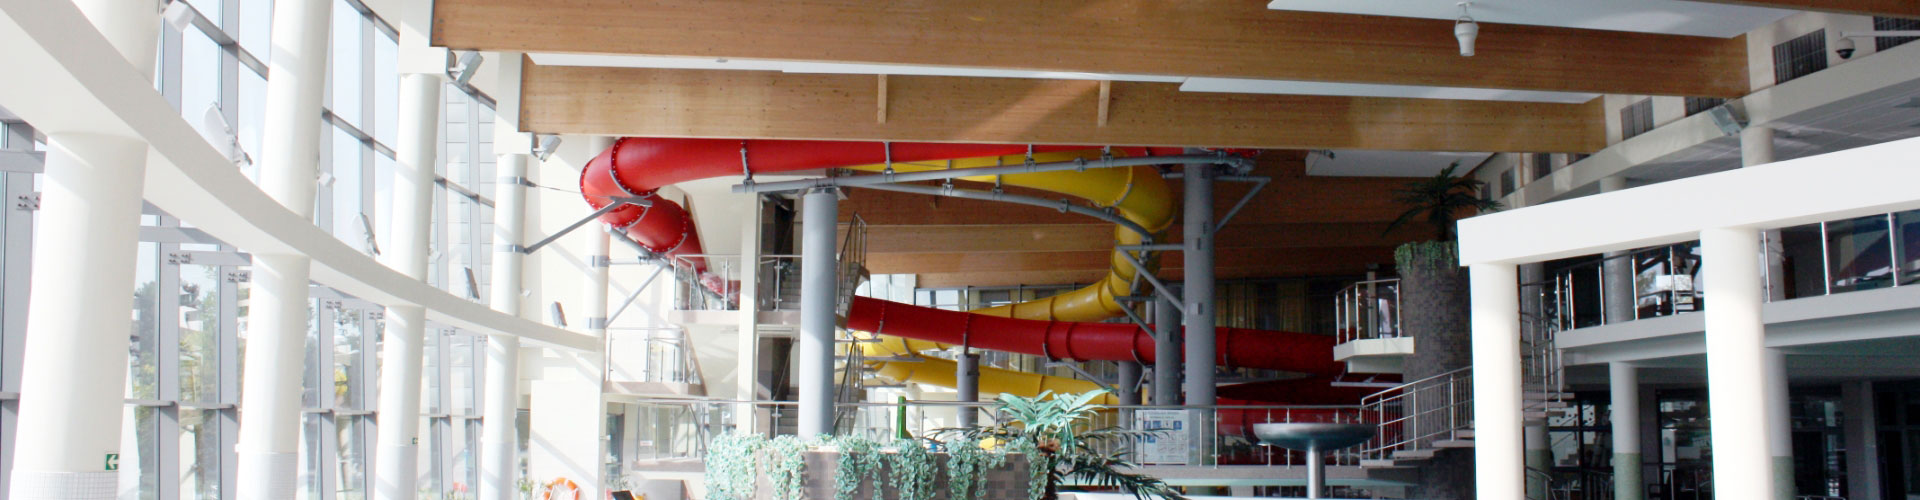 Airius Destratification Fan Installations in Sports and Leisure Buildings - Banner 3